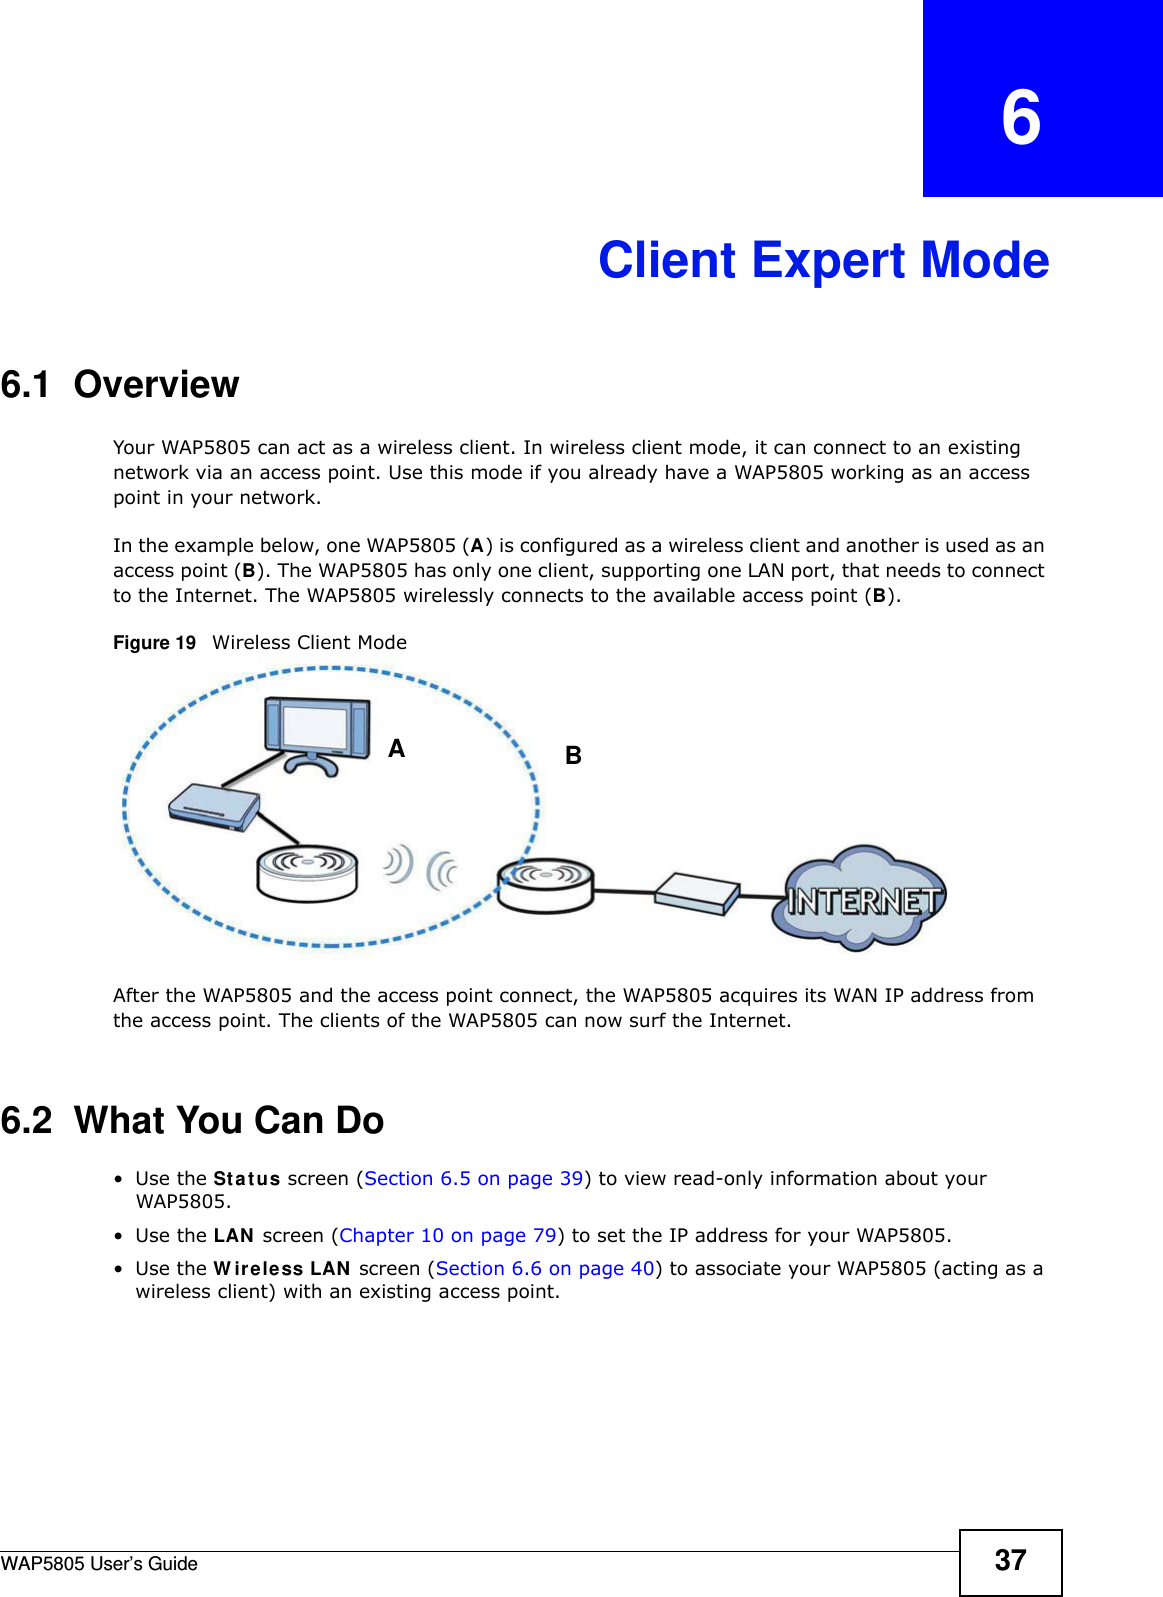 WAP5805 User’s Guide 37CHAPTER   6Client Expert Mode6.1  OverviewYour WAP5805 can act as a wireless client. In wireless client mode, it can connect to an existing network via an access point. Use this mode if you already have a WAP5805 working as an access point in your network.In the example below, one WAP5805 (A) is configured as a wireless client and another is used as an access point (B). The WAP5805 has only one client, supporting one LAN port, that needs to connect to the Internet. The WAP5805 wirelessly connects to the available access point (B). Figure 19   Wireless Client ModeAfter the WAP5805 and the access point connect, the WAP5805 acquires its WAN IP address from the access point. The clients of the WAP5805 can now surf the Internet. 6.2  What You Can Do•Use the Status screen (Section 6.5 on page 39) to view read-only information about your WAP5805.•Use the LAN screen (Chapter 10 on page 79) to set the IP address for your WAP5805.•Use the Wireless LAN screen (Section 6.6 on page 40) to associate your WAP5805 (acting as a wireless client) with an existing access point.    A B